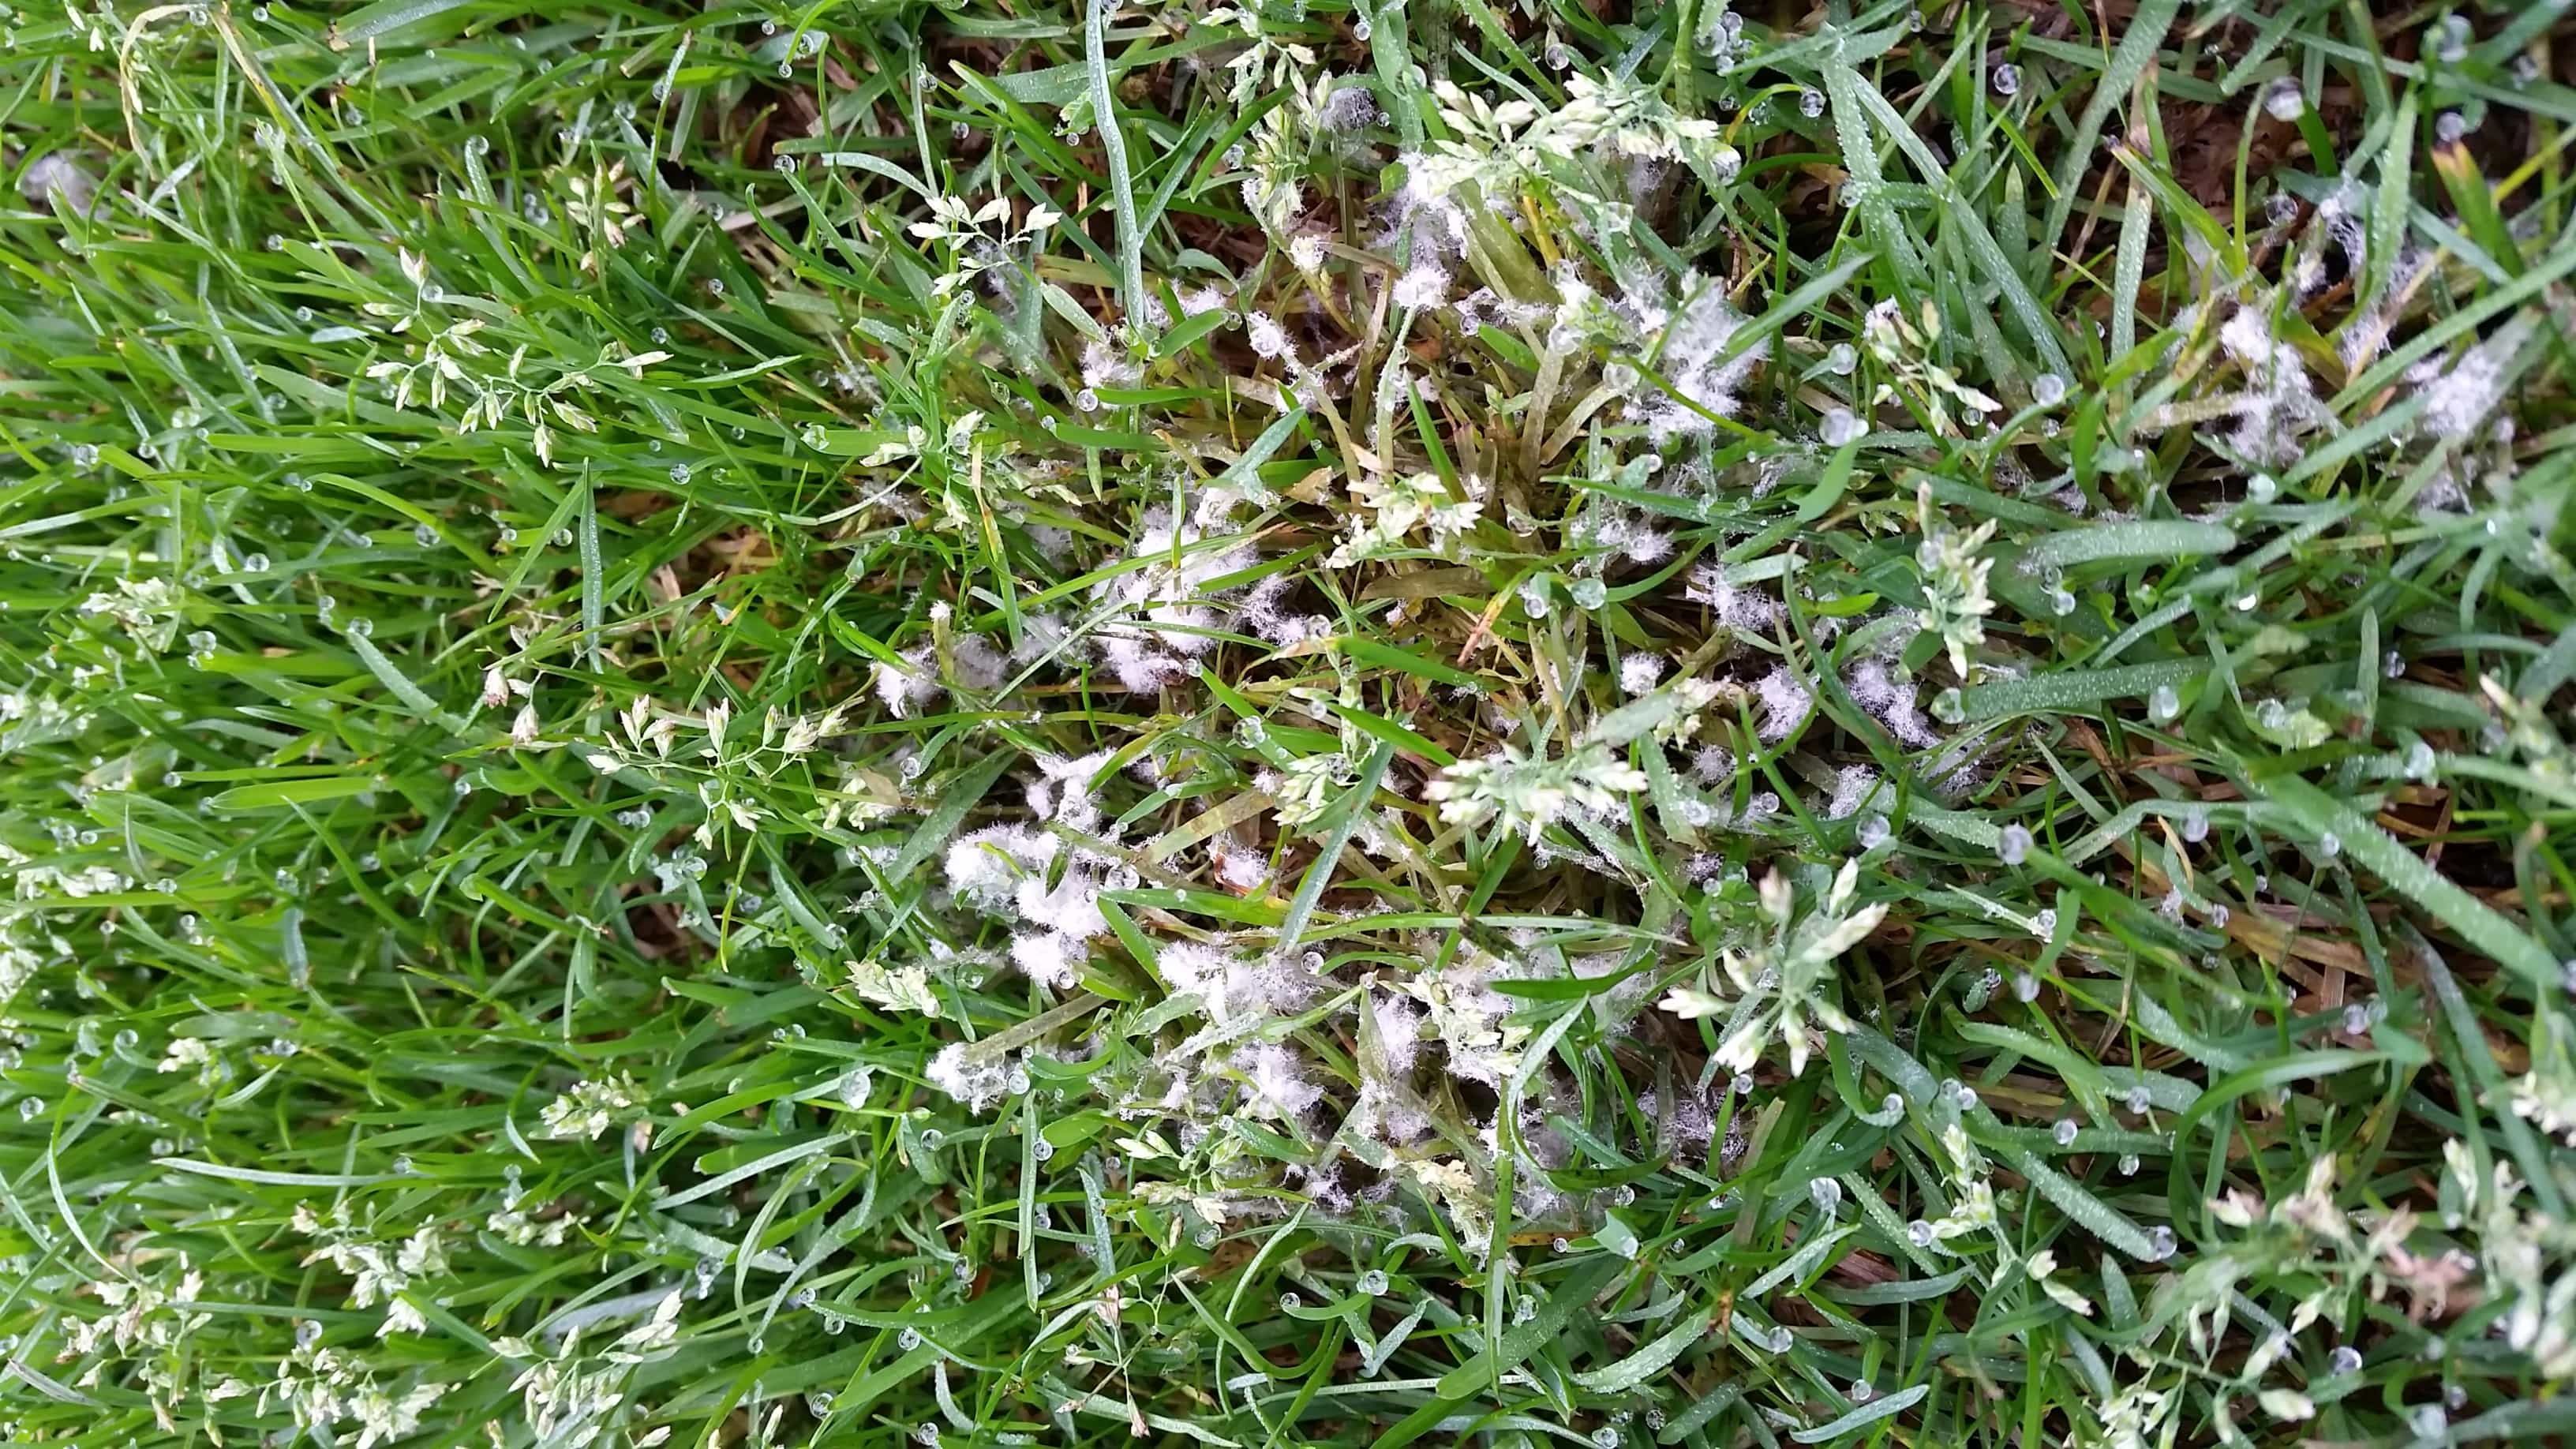 Fusarium or snow mould as it's sometimes known